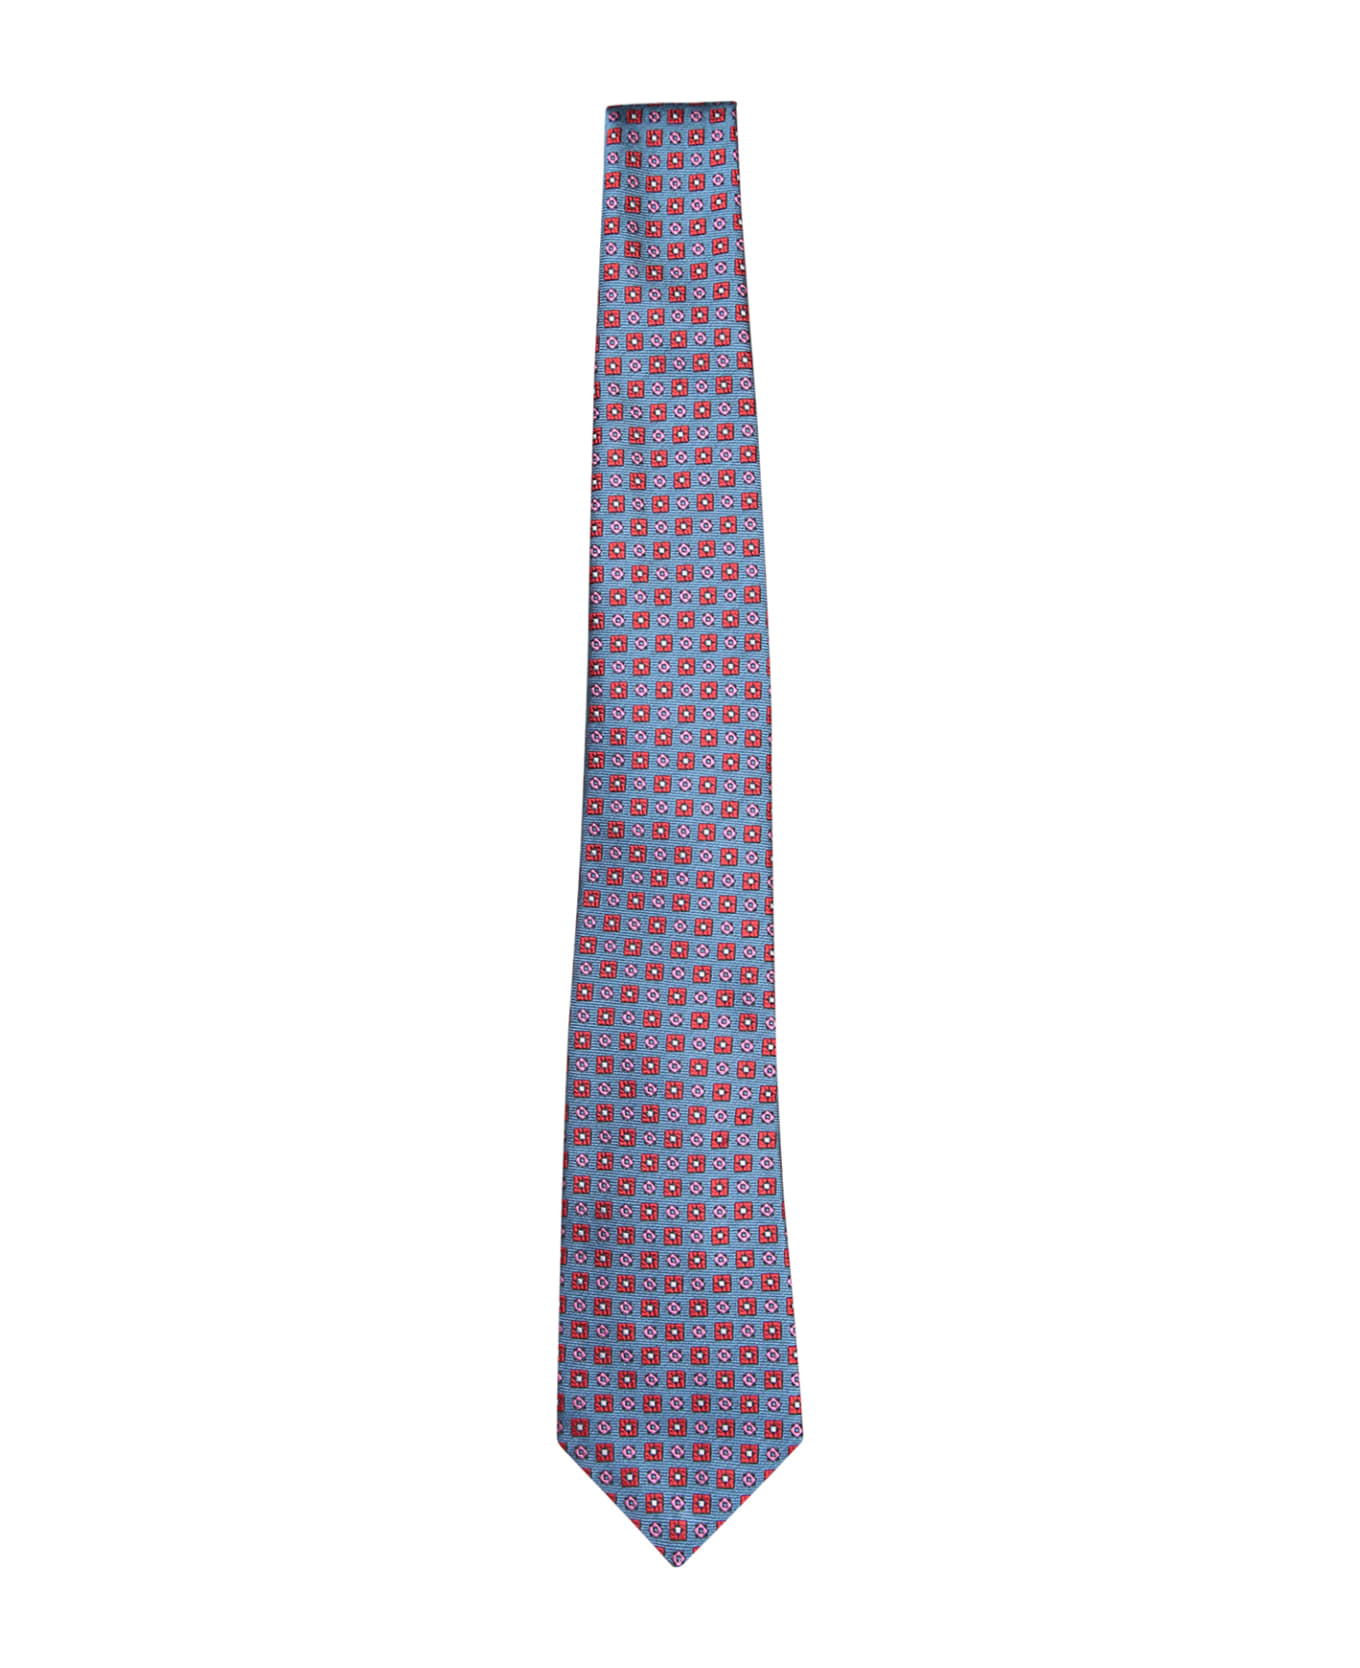 Kiton Blue/red/fuchsia Patterned Tie - Pink